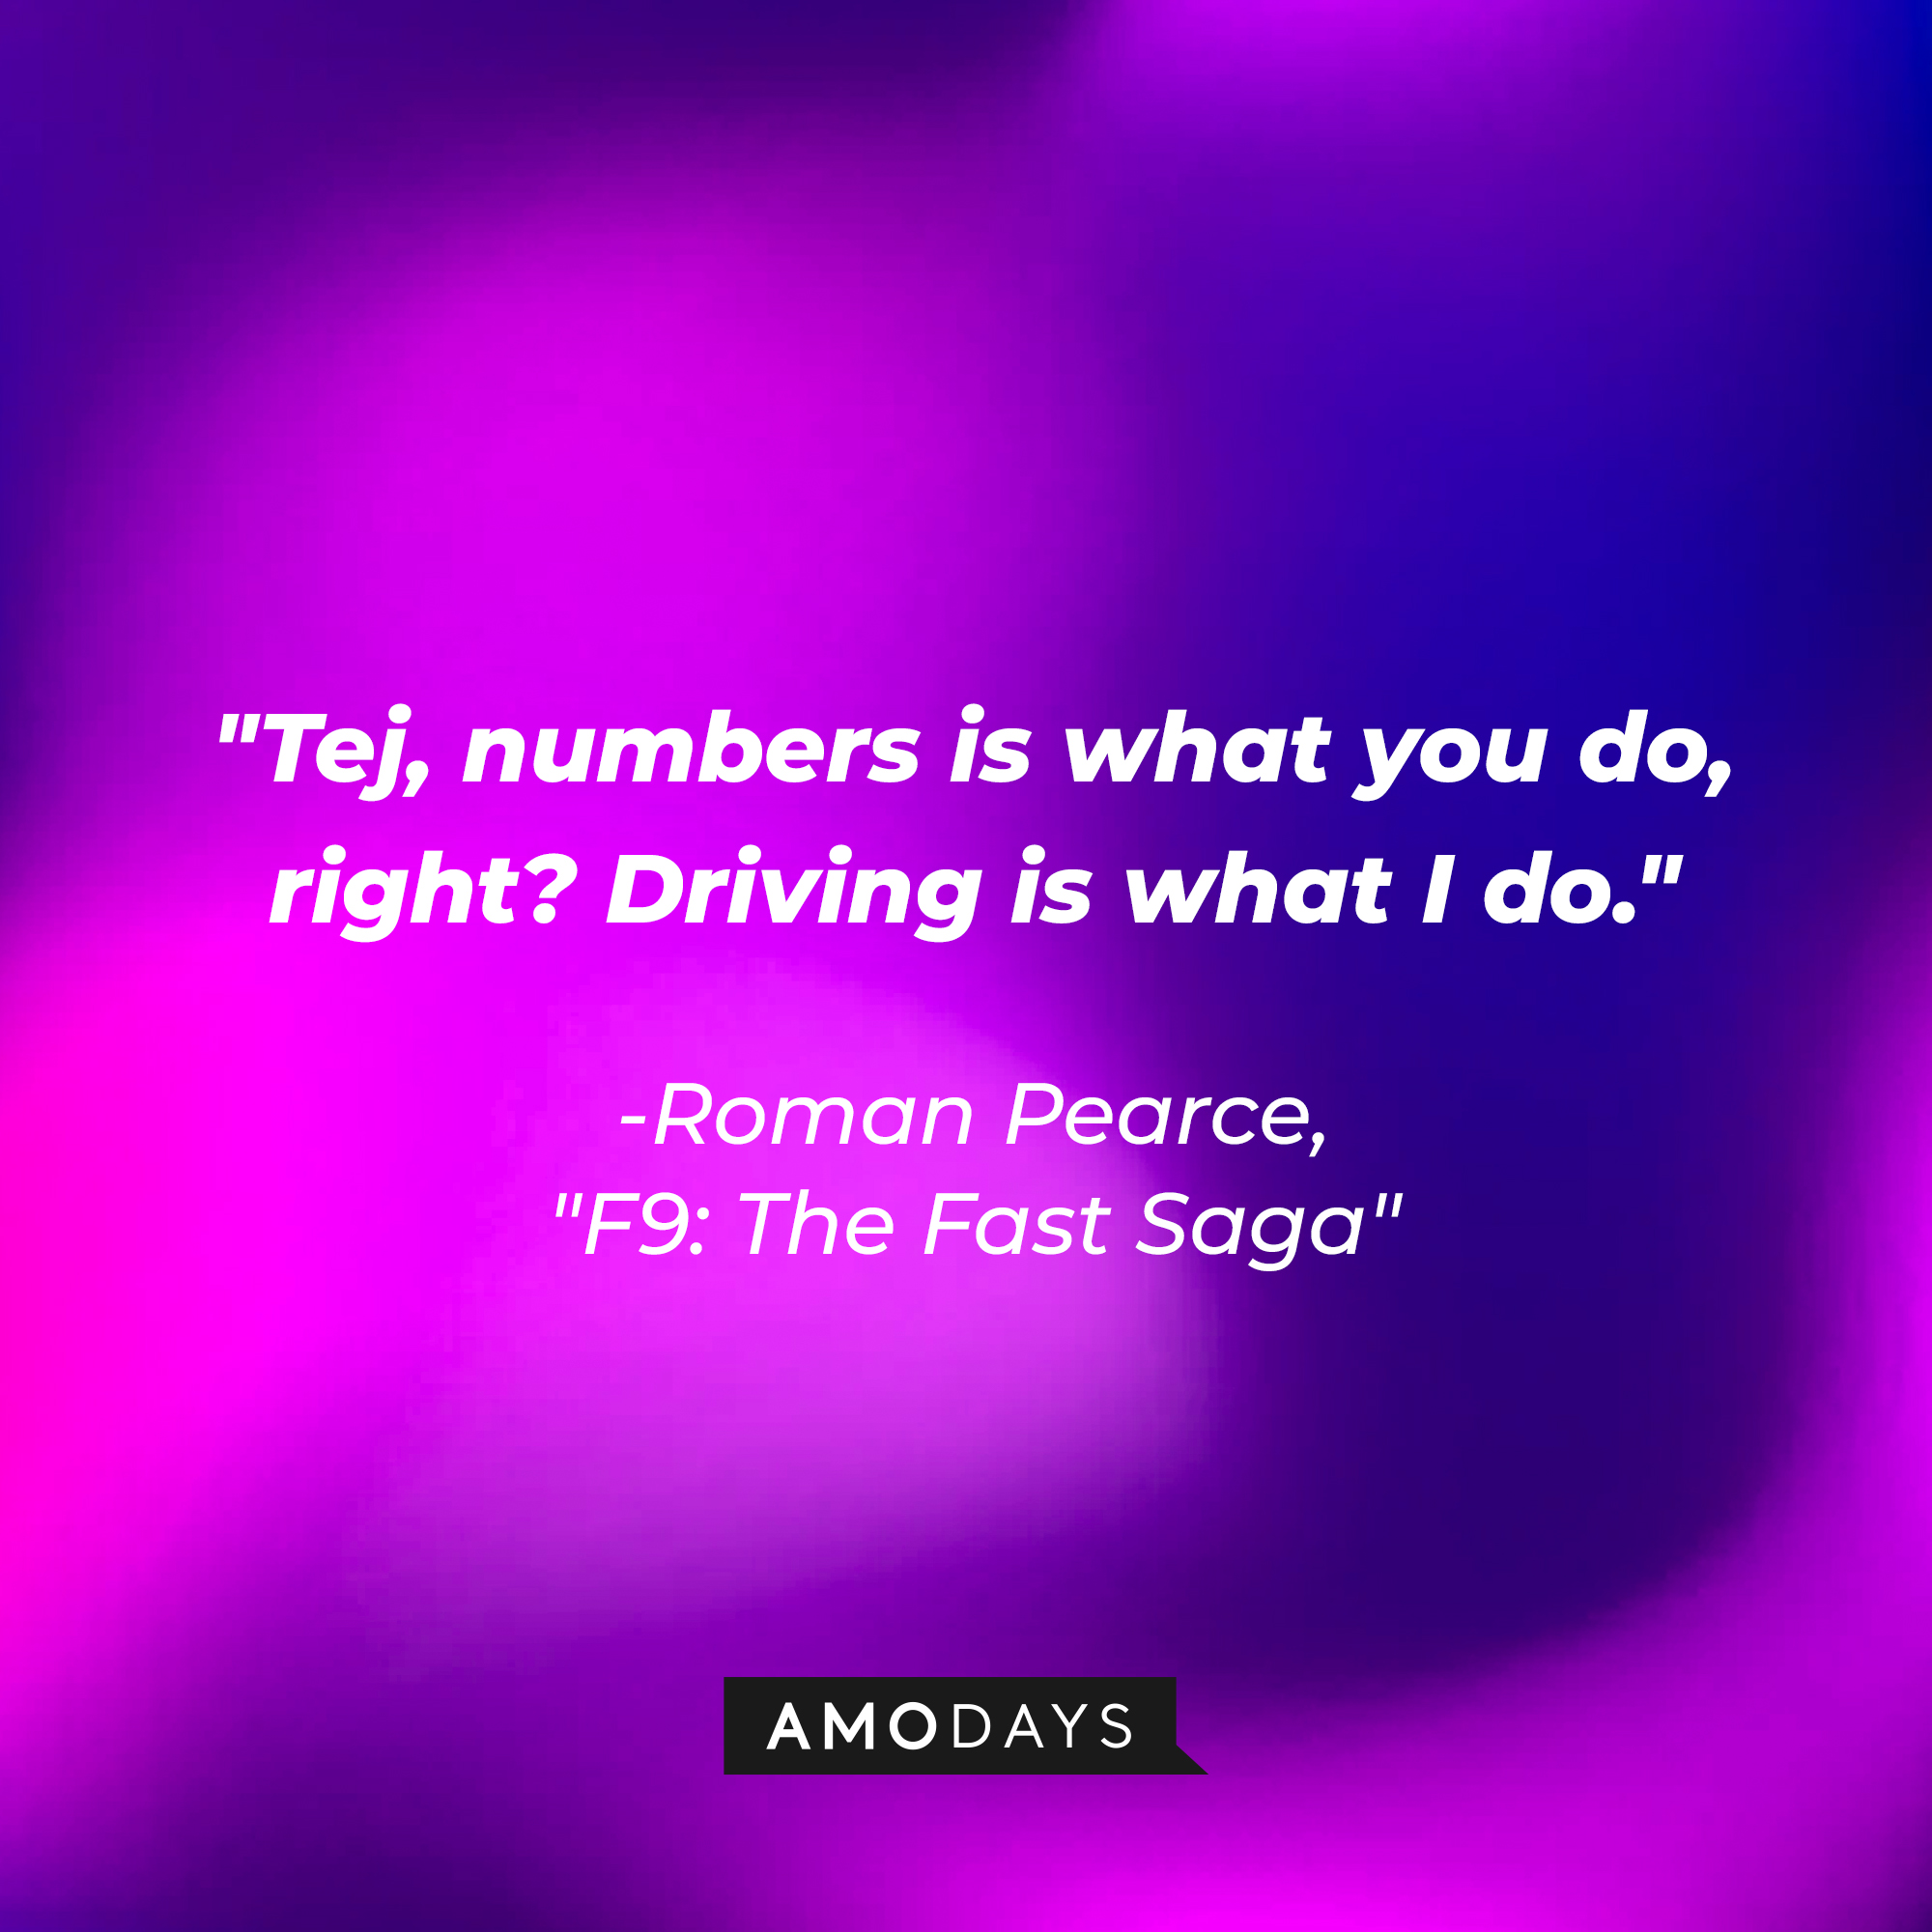 Roman Pearce’s quote: "Tej, numbers is what you do, right? Driving is what I do." | Image: AmoDays